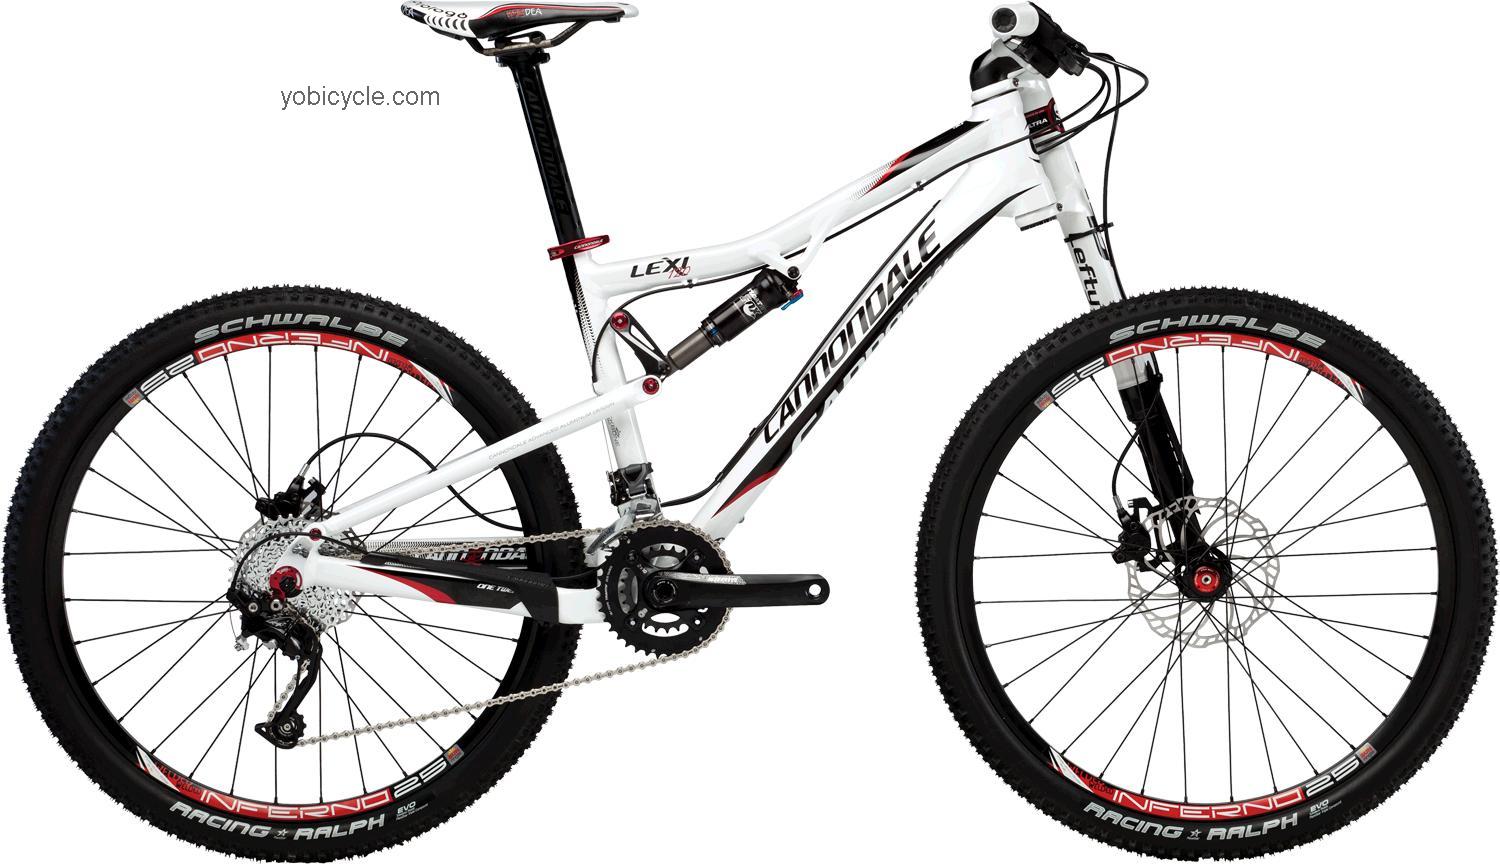 Cannondale  Lexi 1 Technical data and specifications